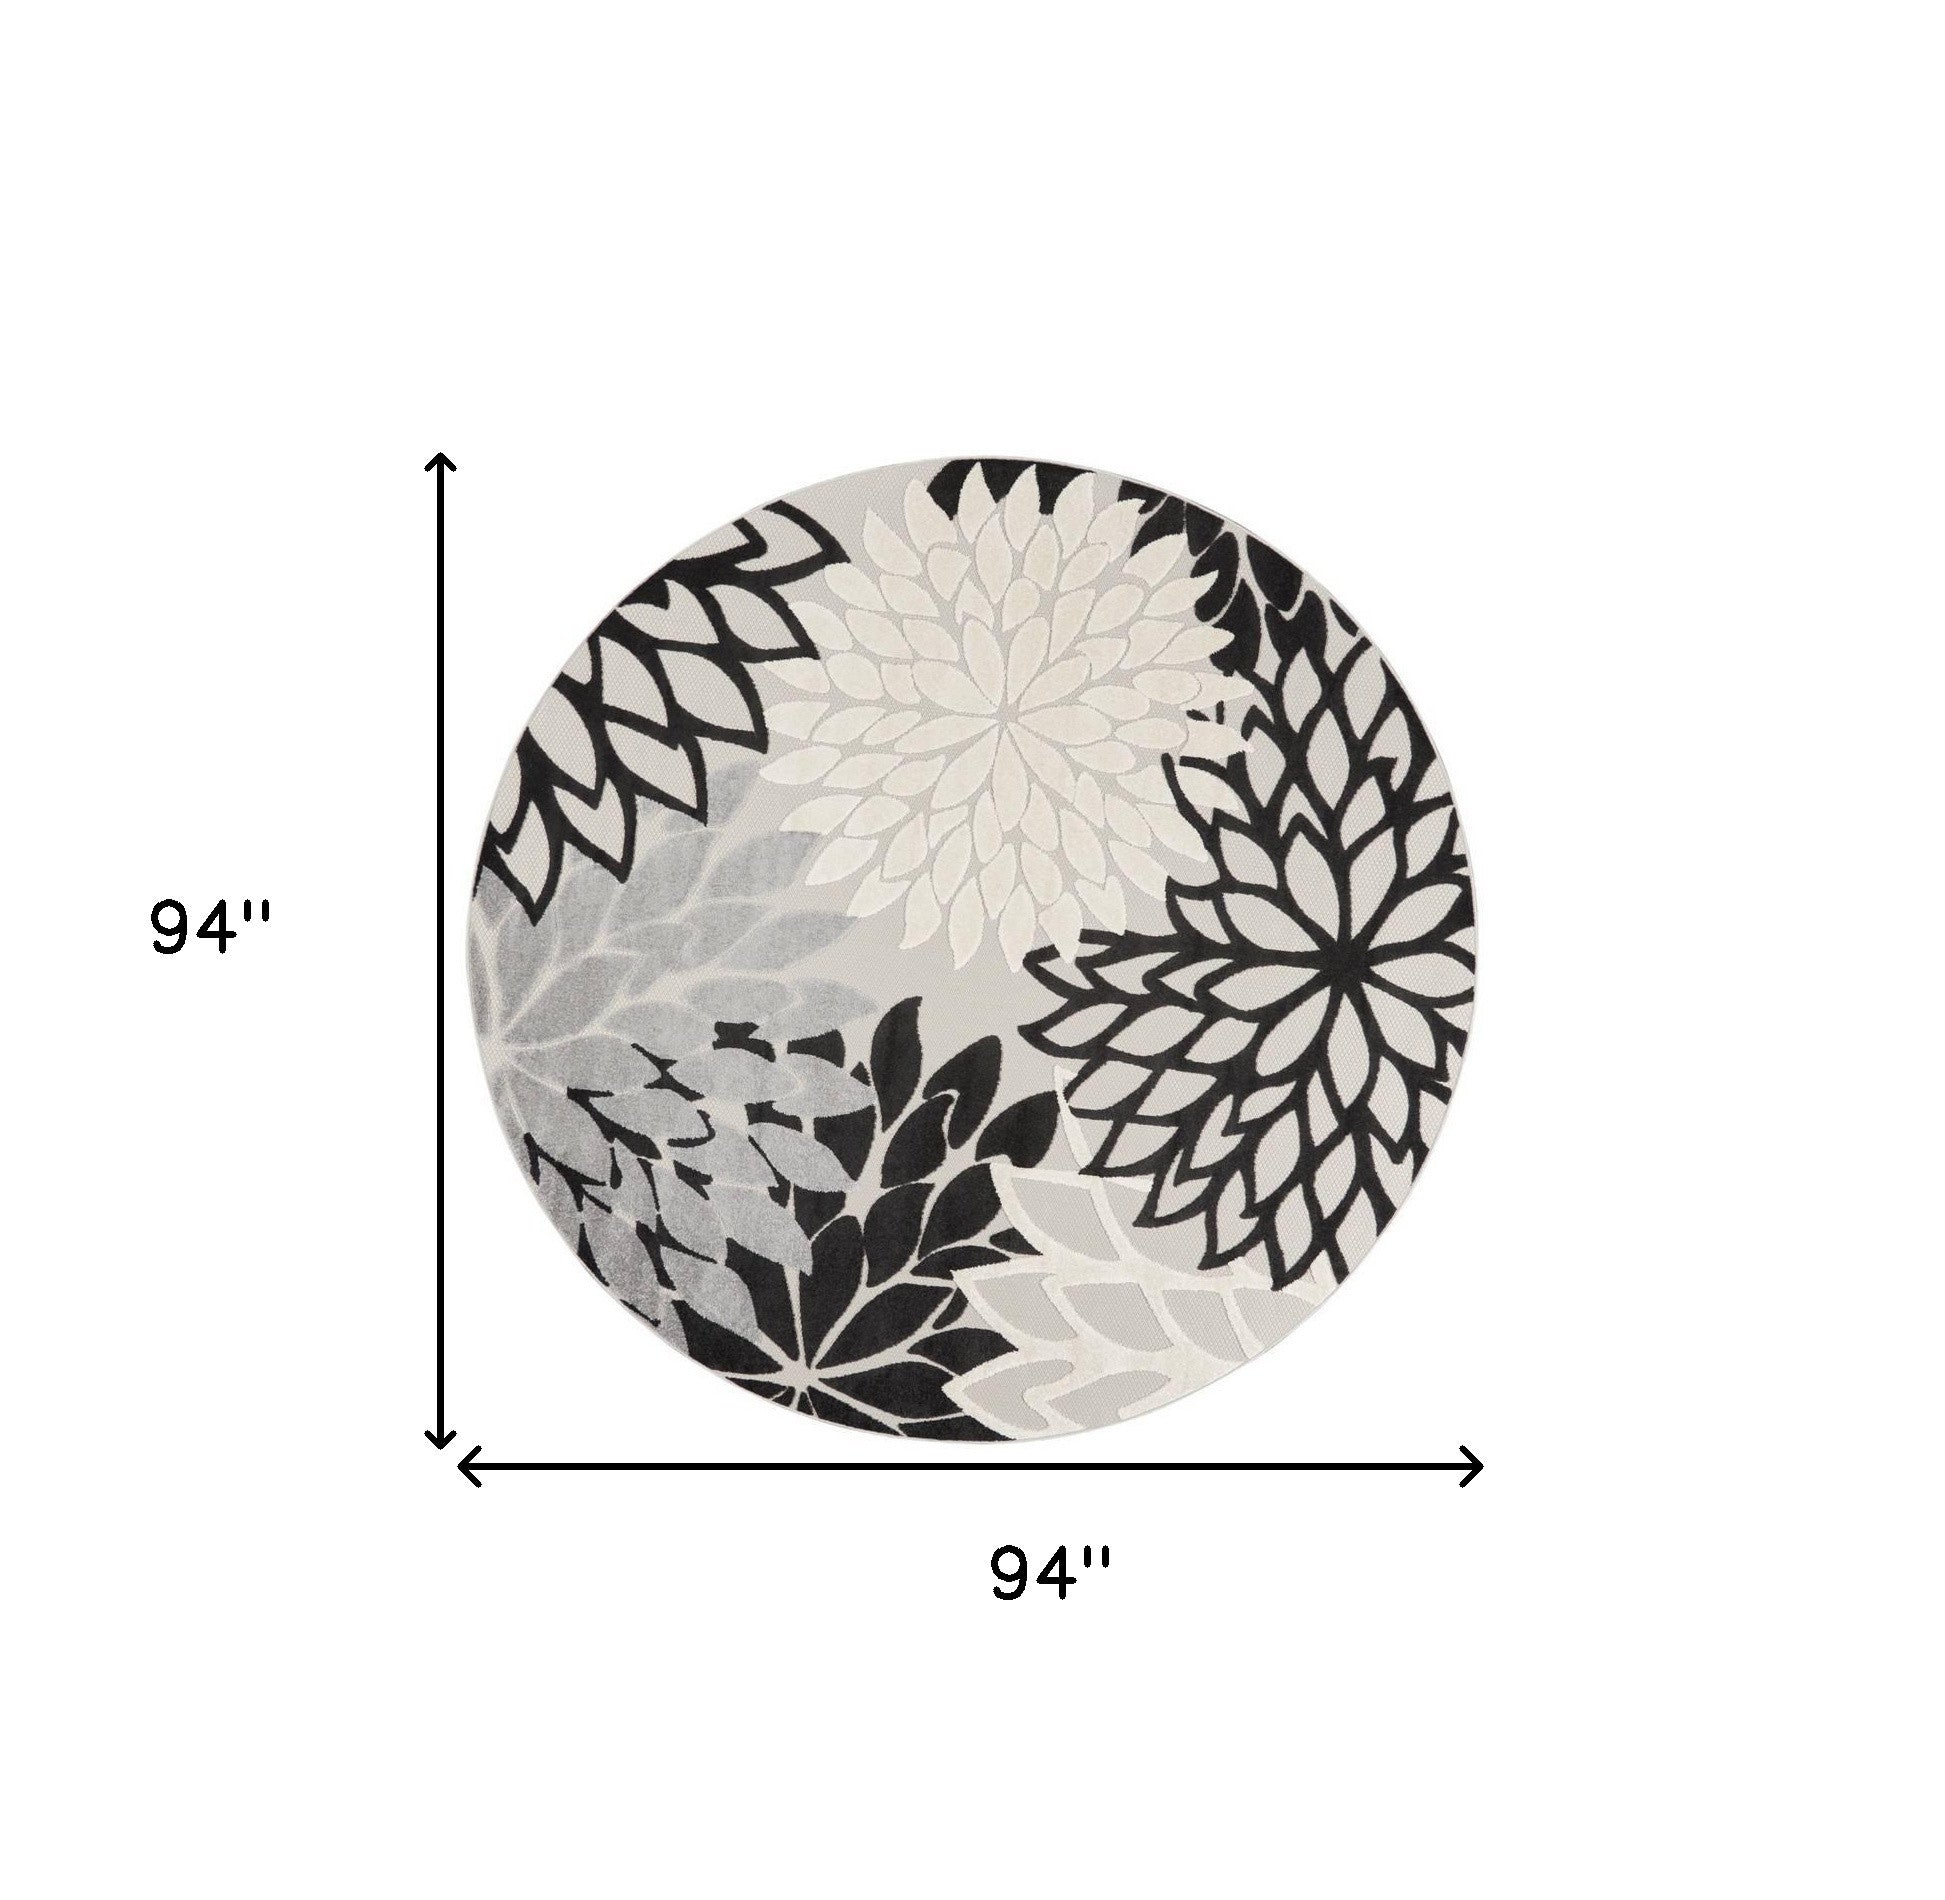 8' X 8' Black And White Round Floral Non Skid Indoor Outdoor Area Rug